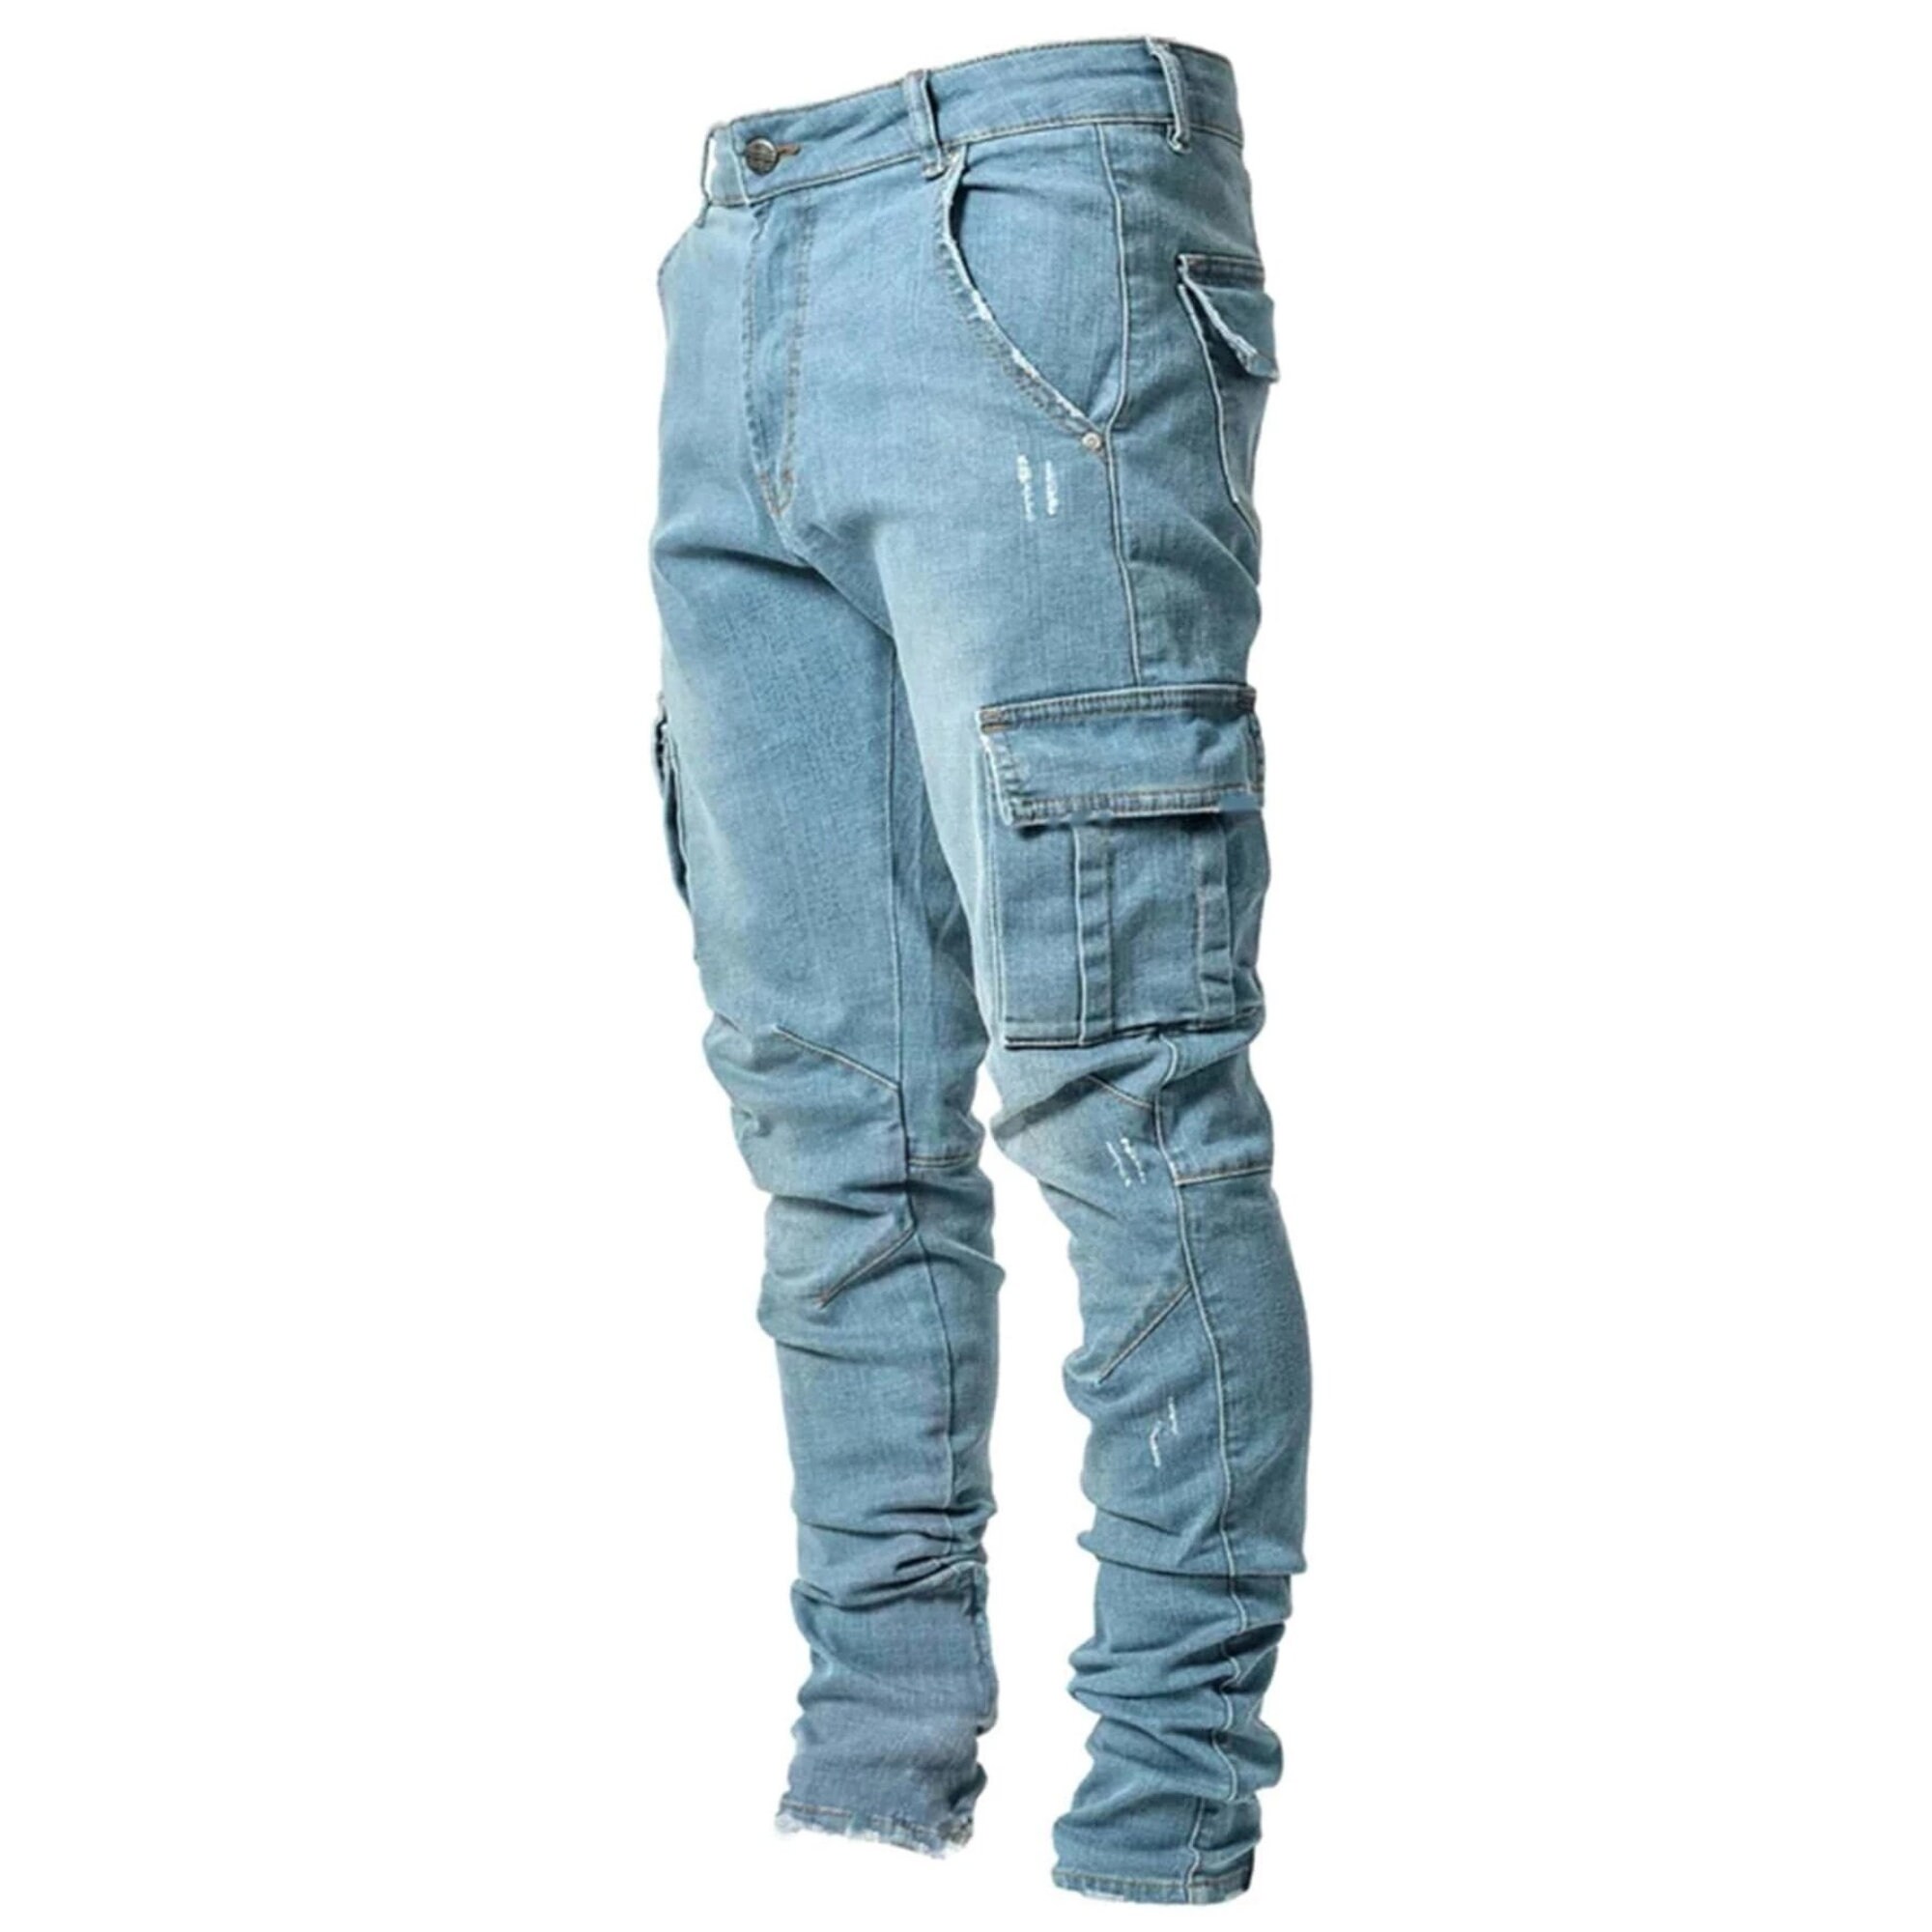 Status nobody mistress Blue Denim Cargo Pants Pencil Cut Ripped Pleated and Casual - Etsy